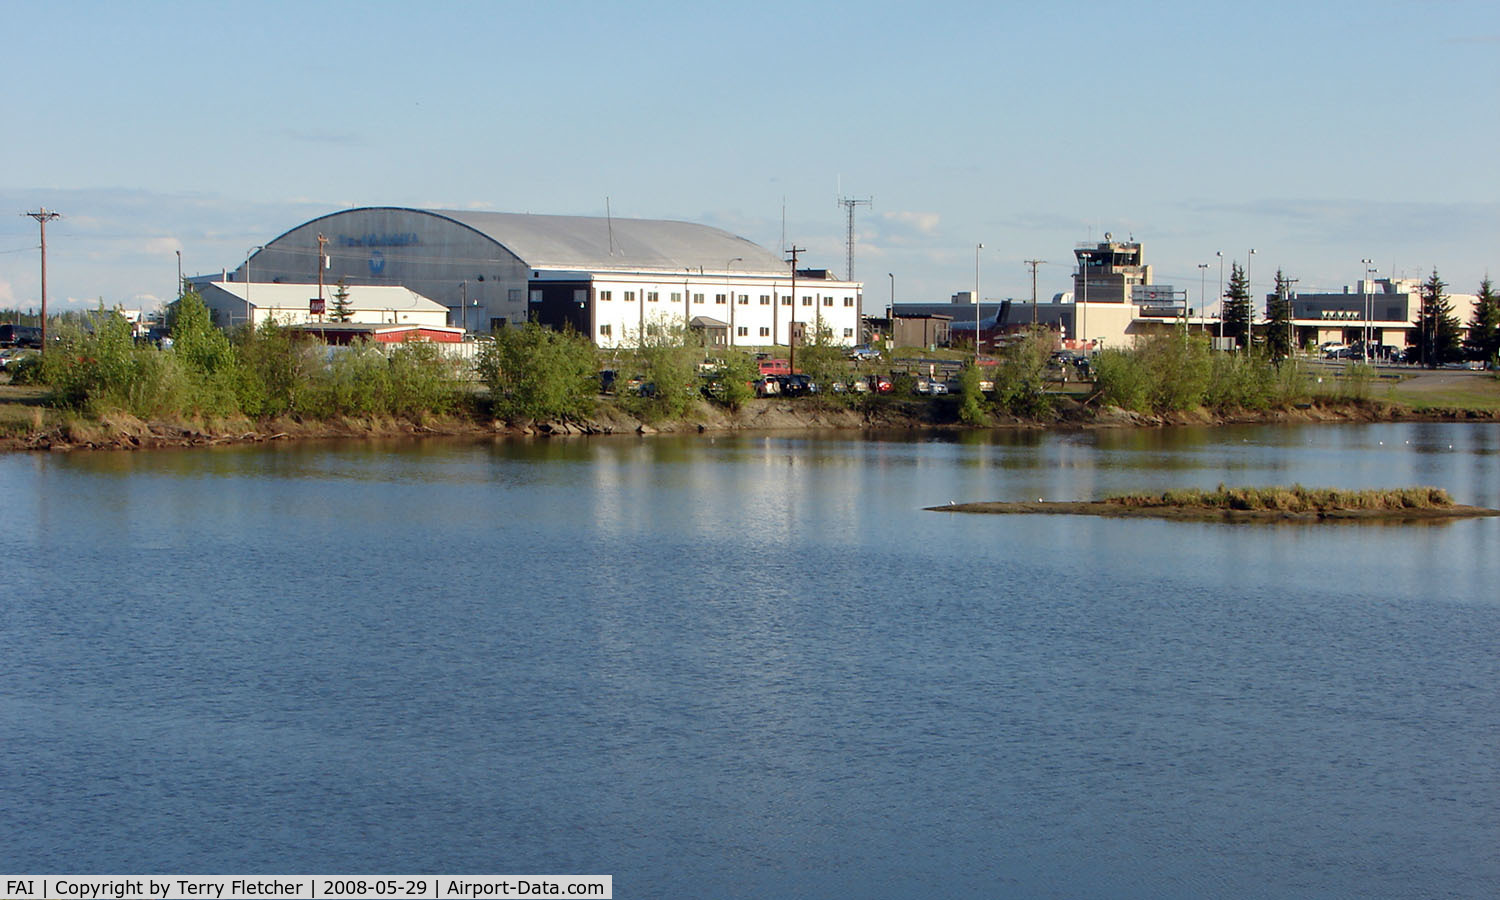 Fairbanks International Airport (FAI) - A view towards the Control Tower and Maintenance Hangars on Fairbanks West side